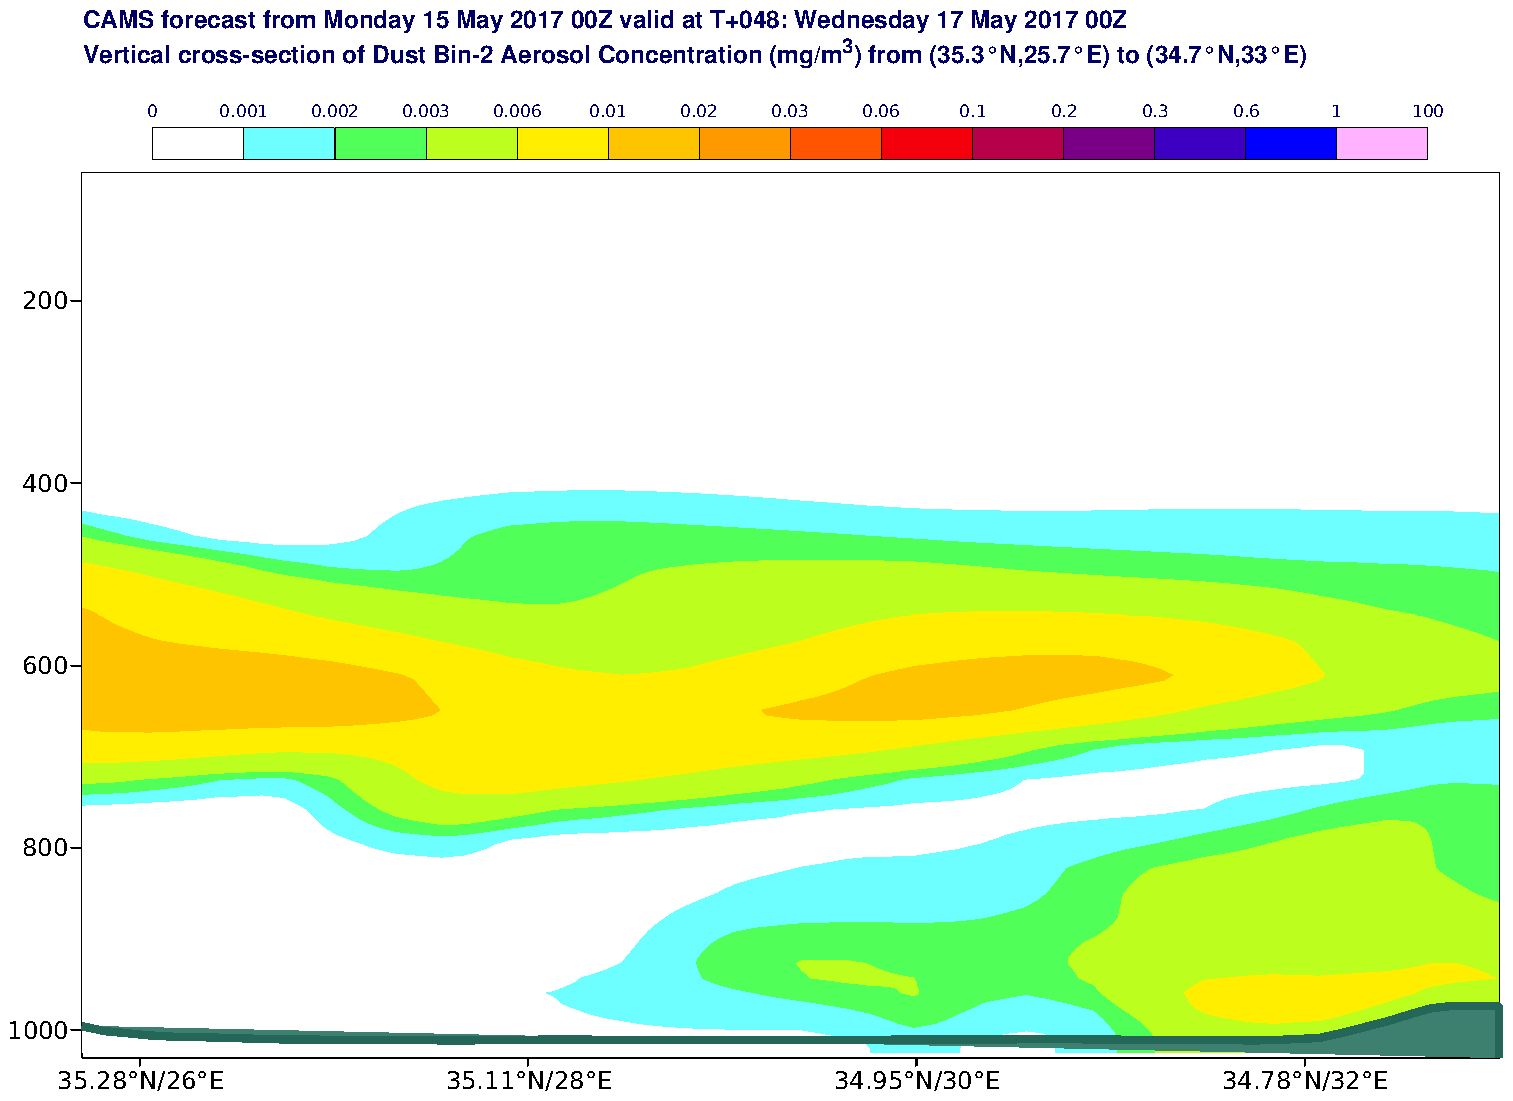 Vertical cross-section of Dust Bin-2 Aerosol Concentration (mg/m3) valid at T48 - 2017-05-17 00:00